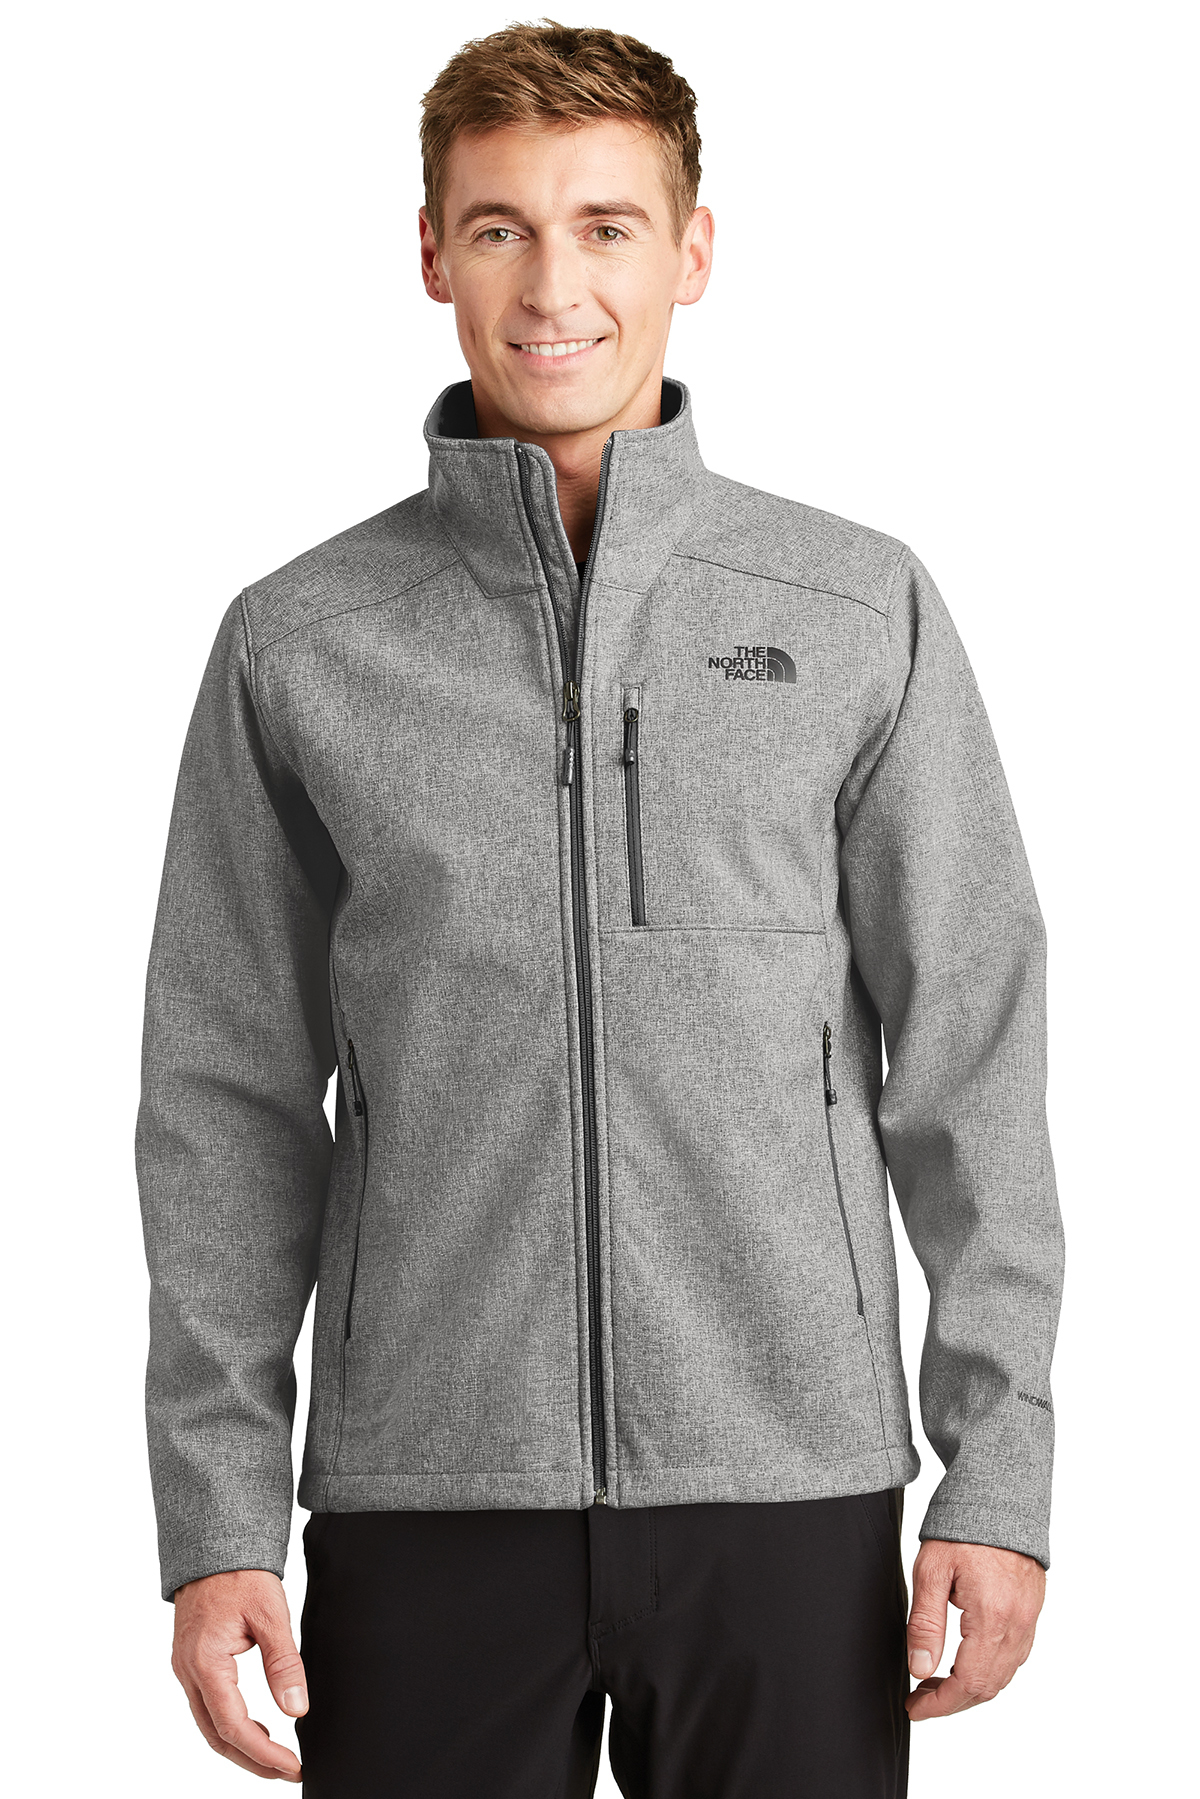 north face corporate jackets